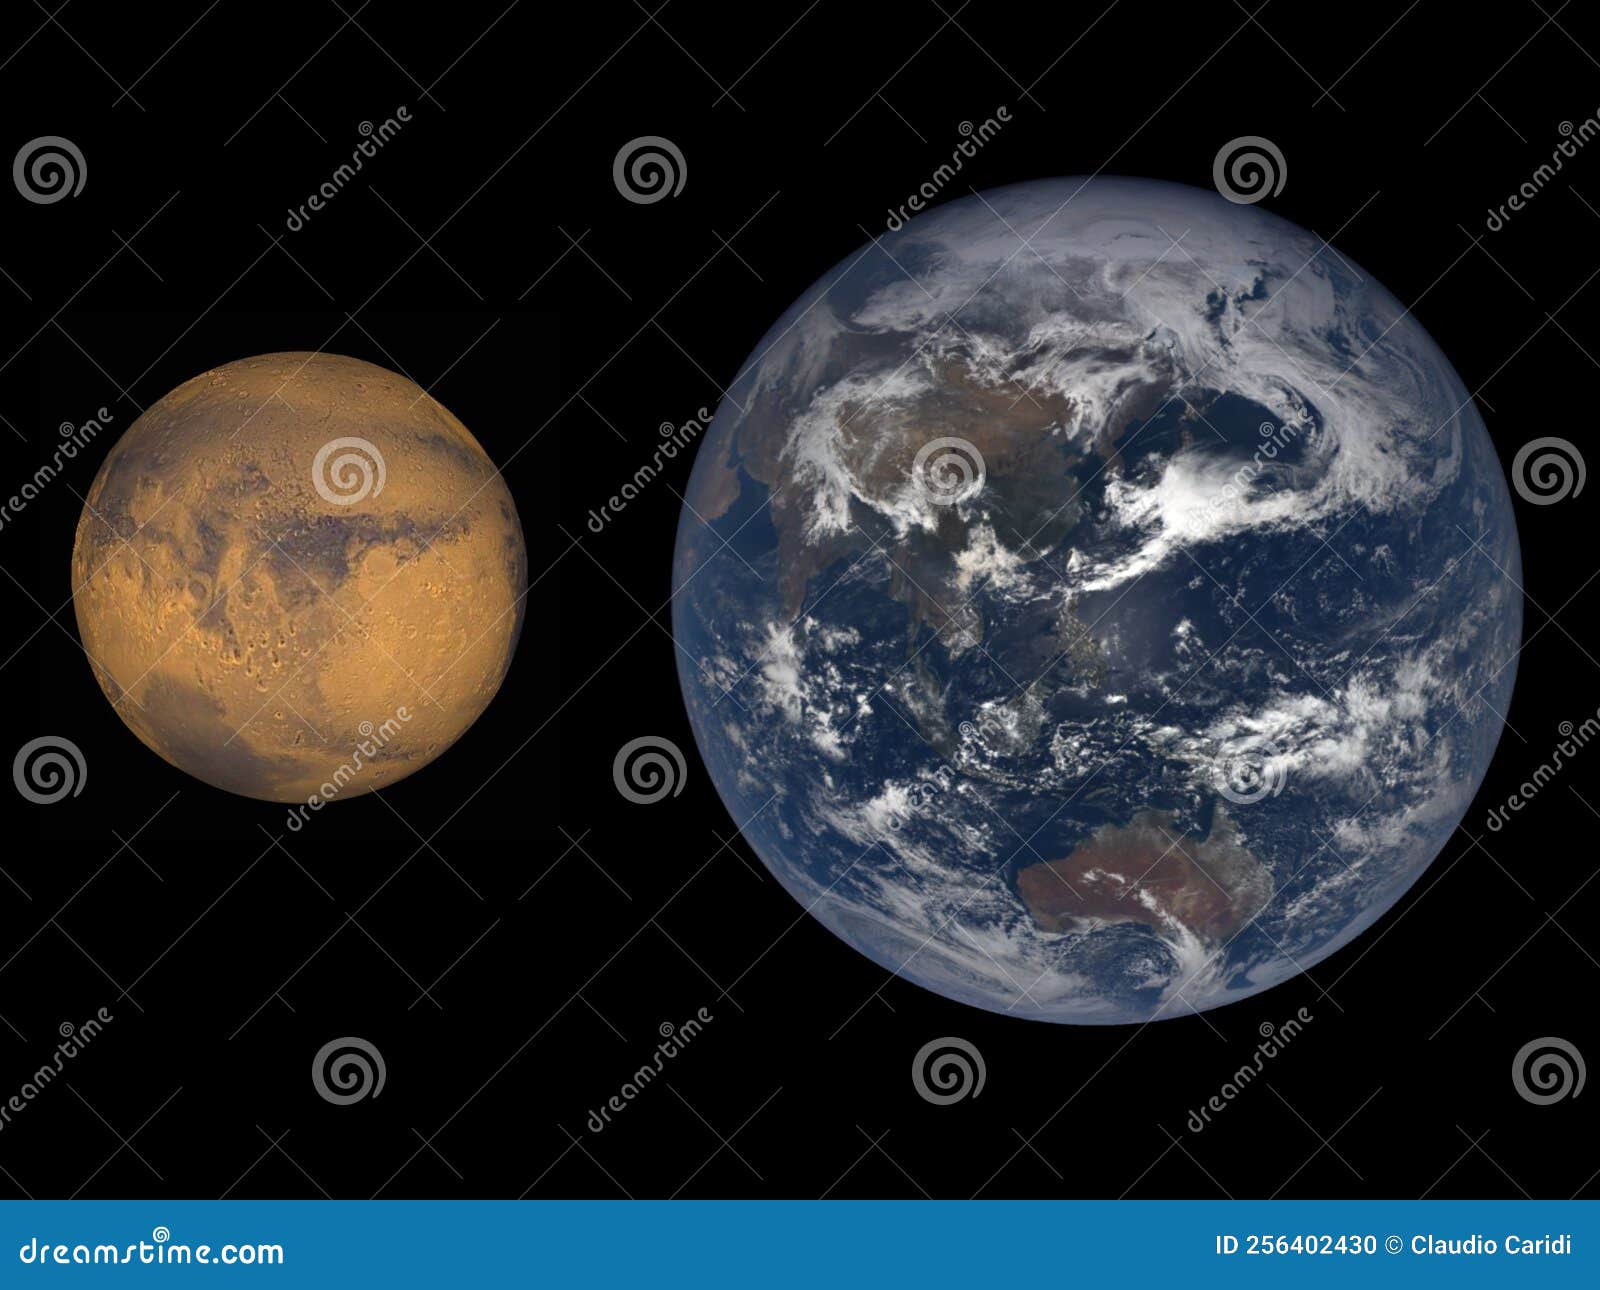 350 Comparison Size Planets Royalty-Free Photos and Stock Images